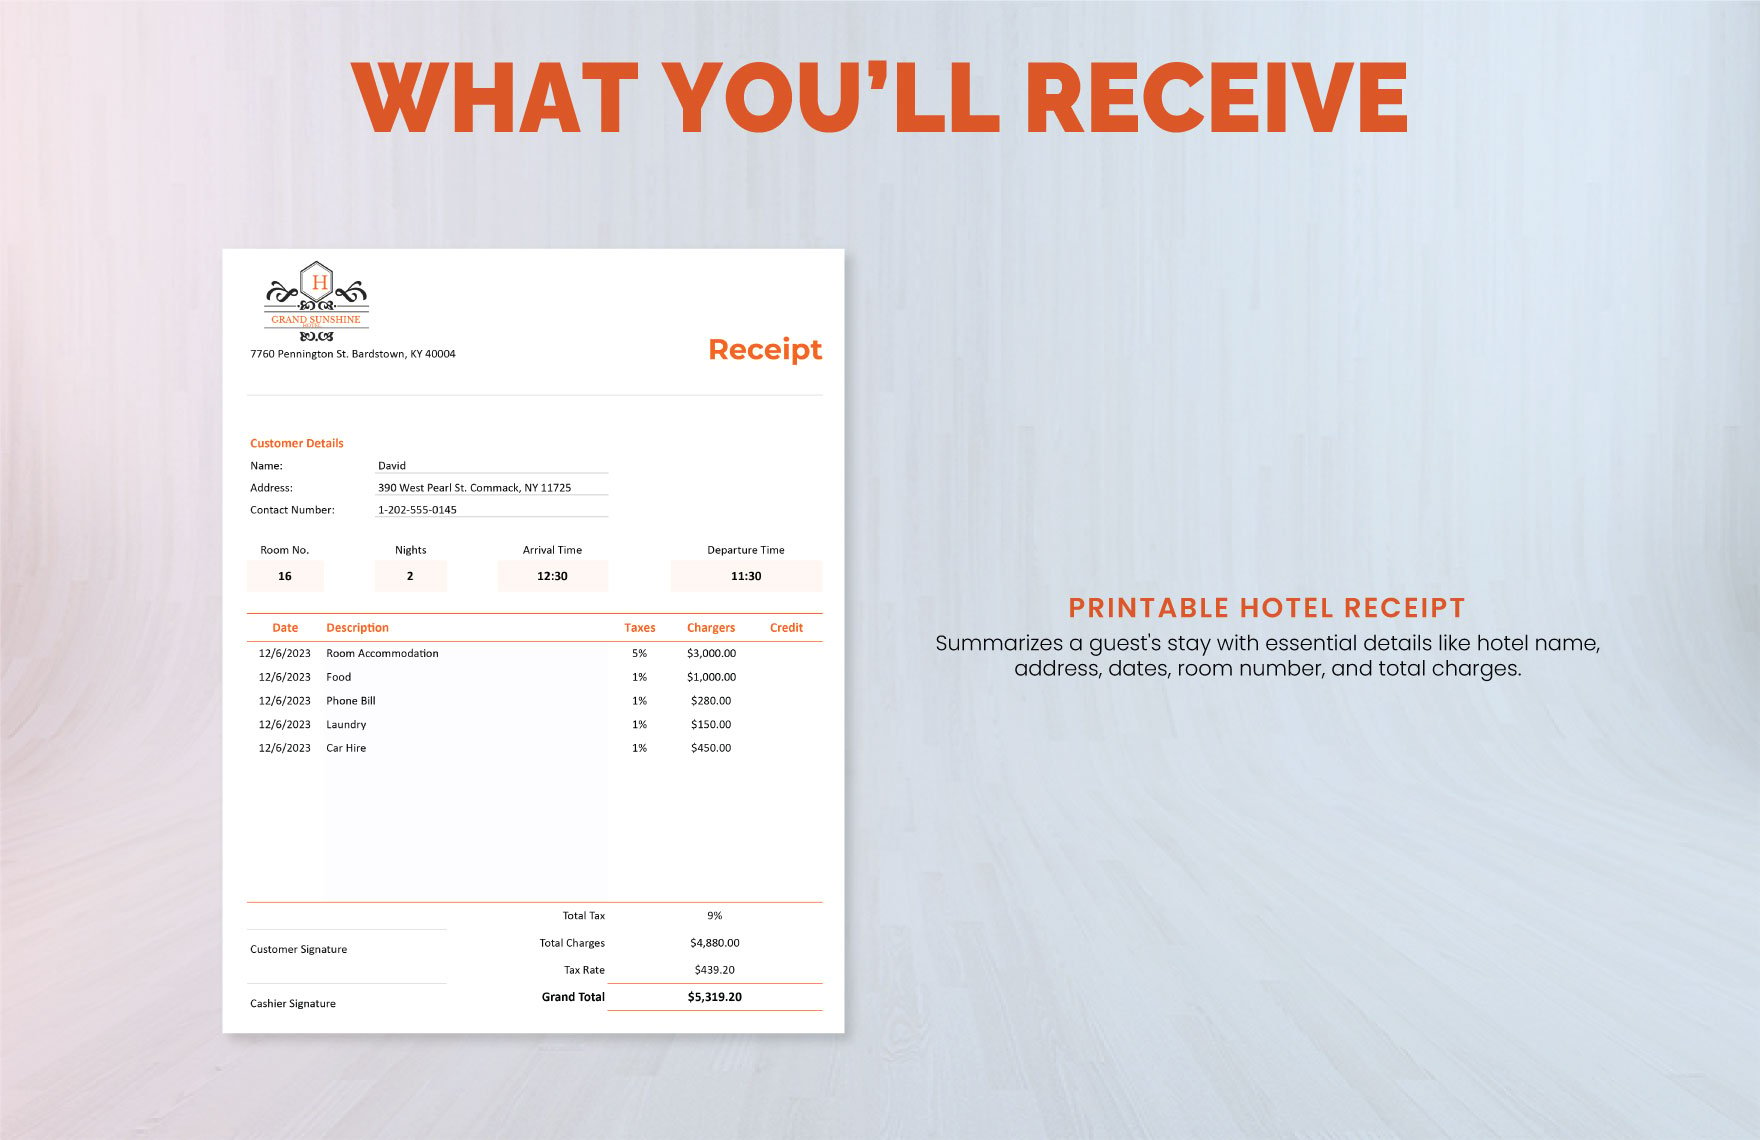 Printable Hotel Receipt Instructions